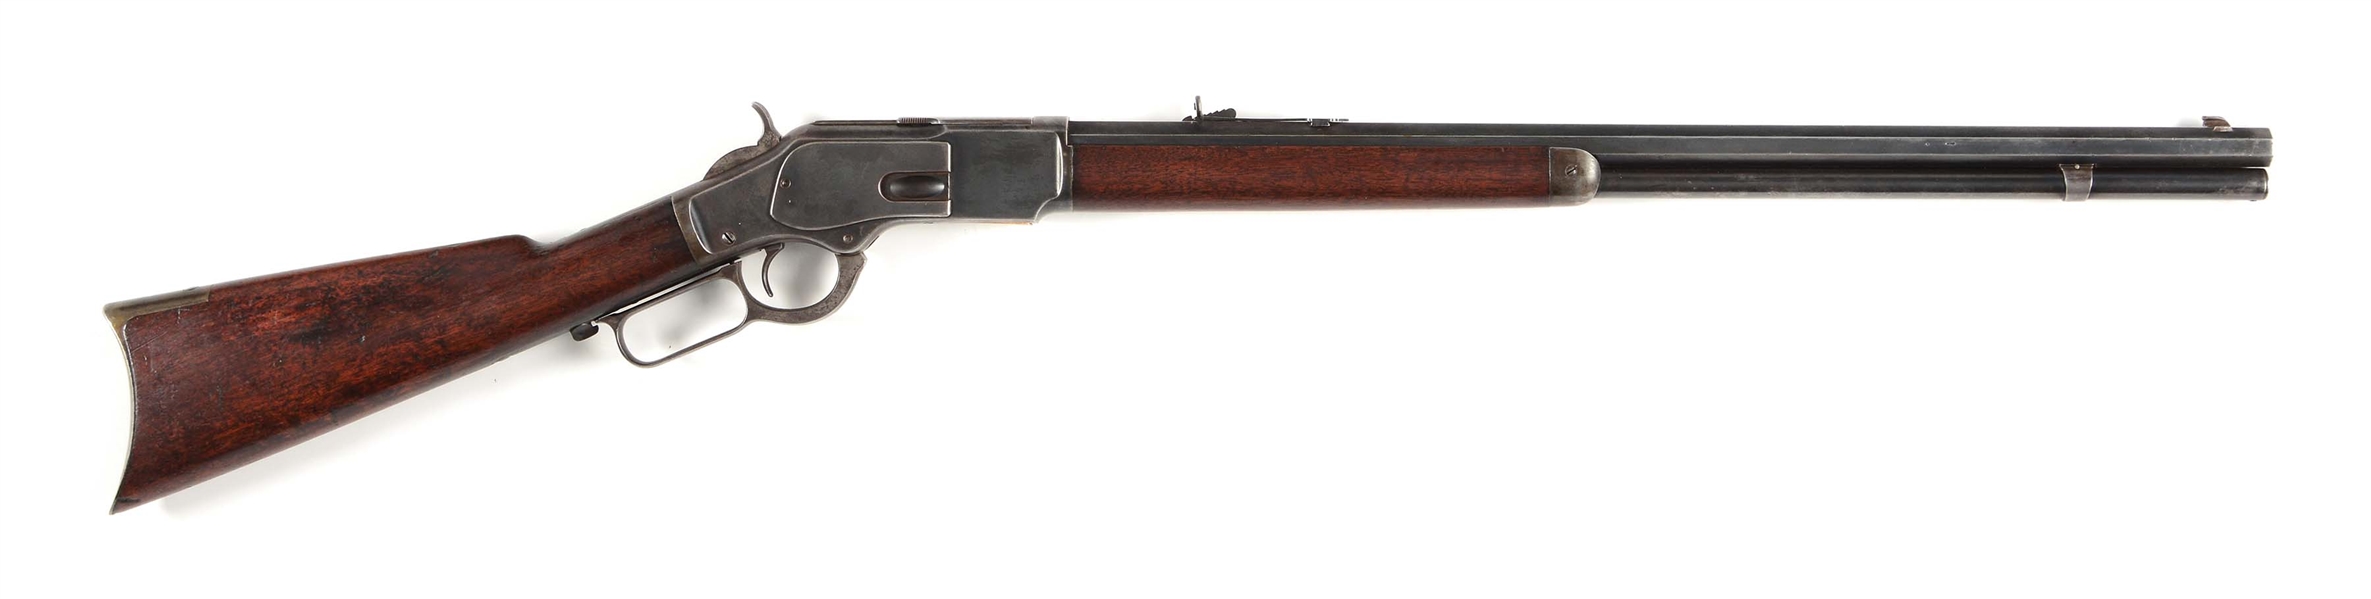 (A) WINCHESTER MODEL 1873 .44 CALIBER LEVER ACTION RIFLE (1889).